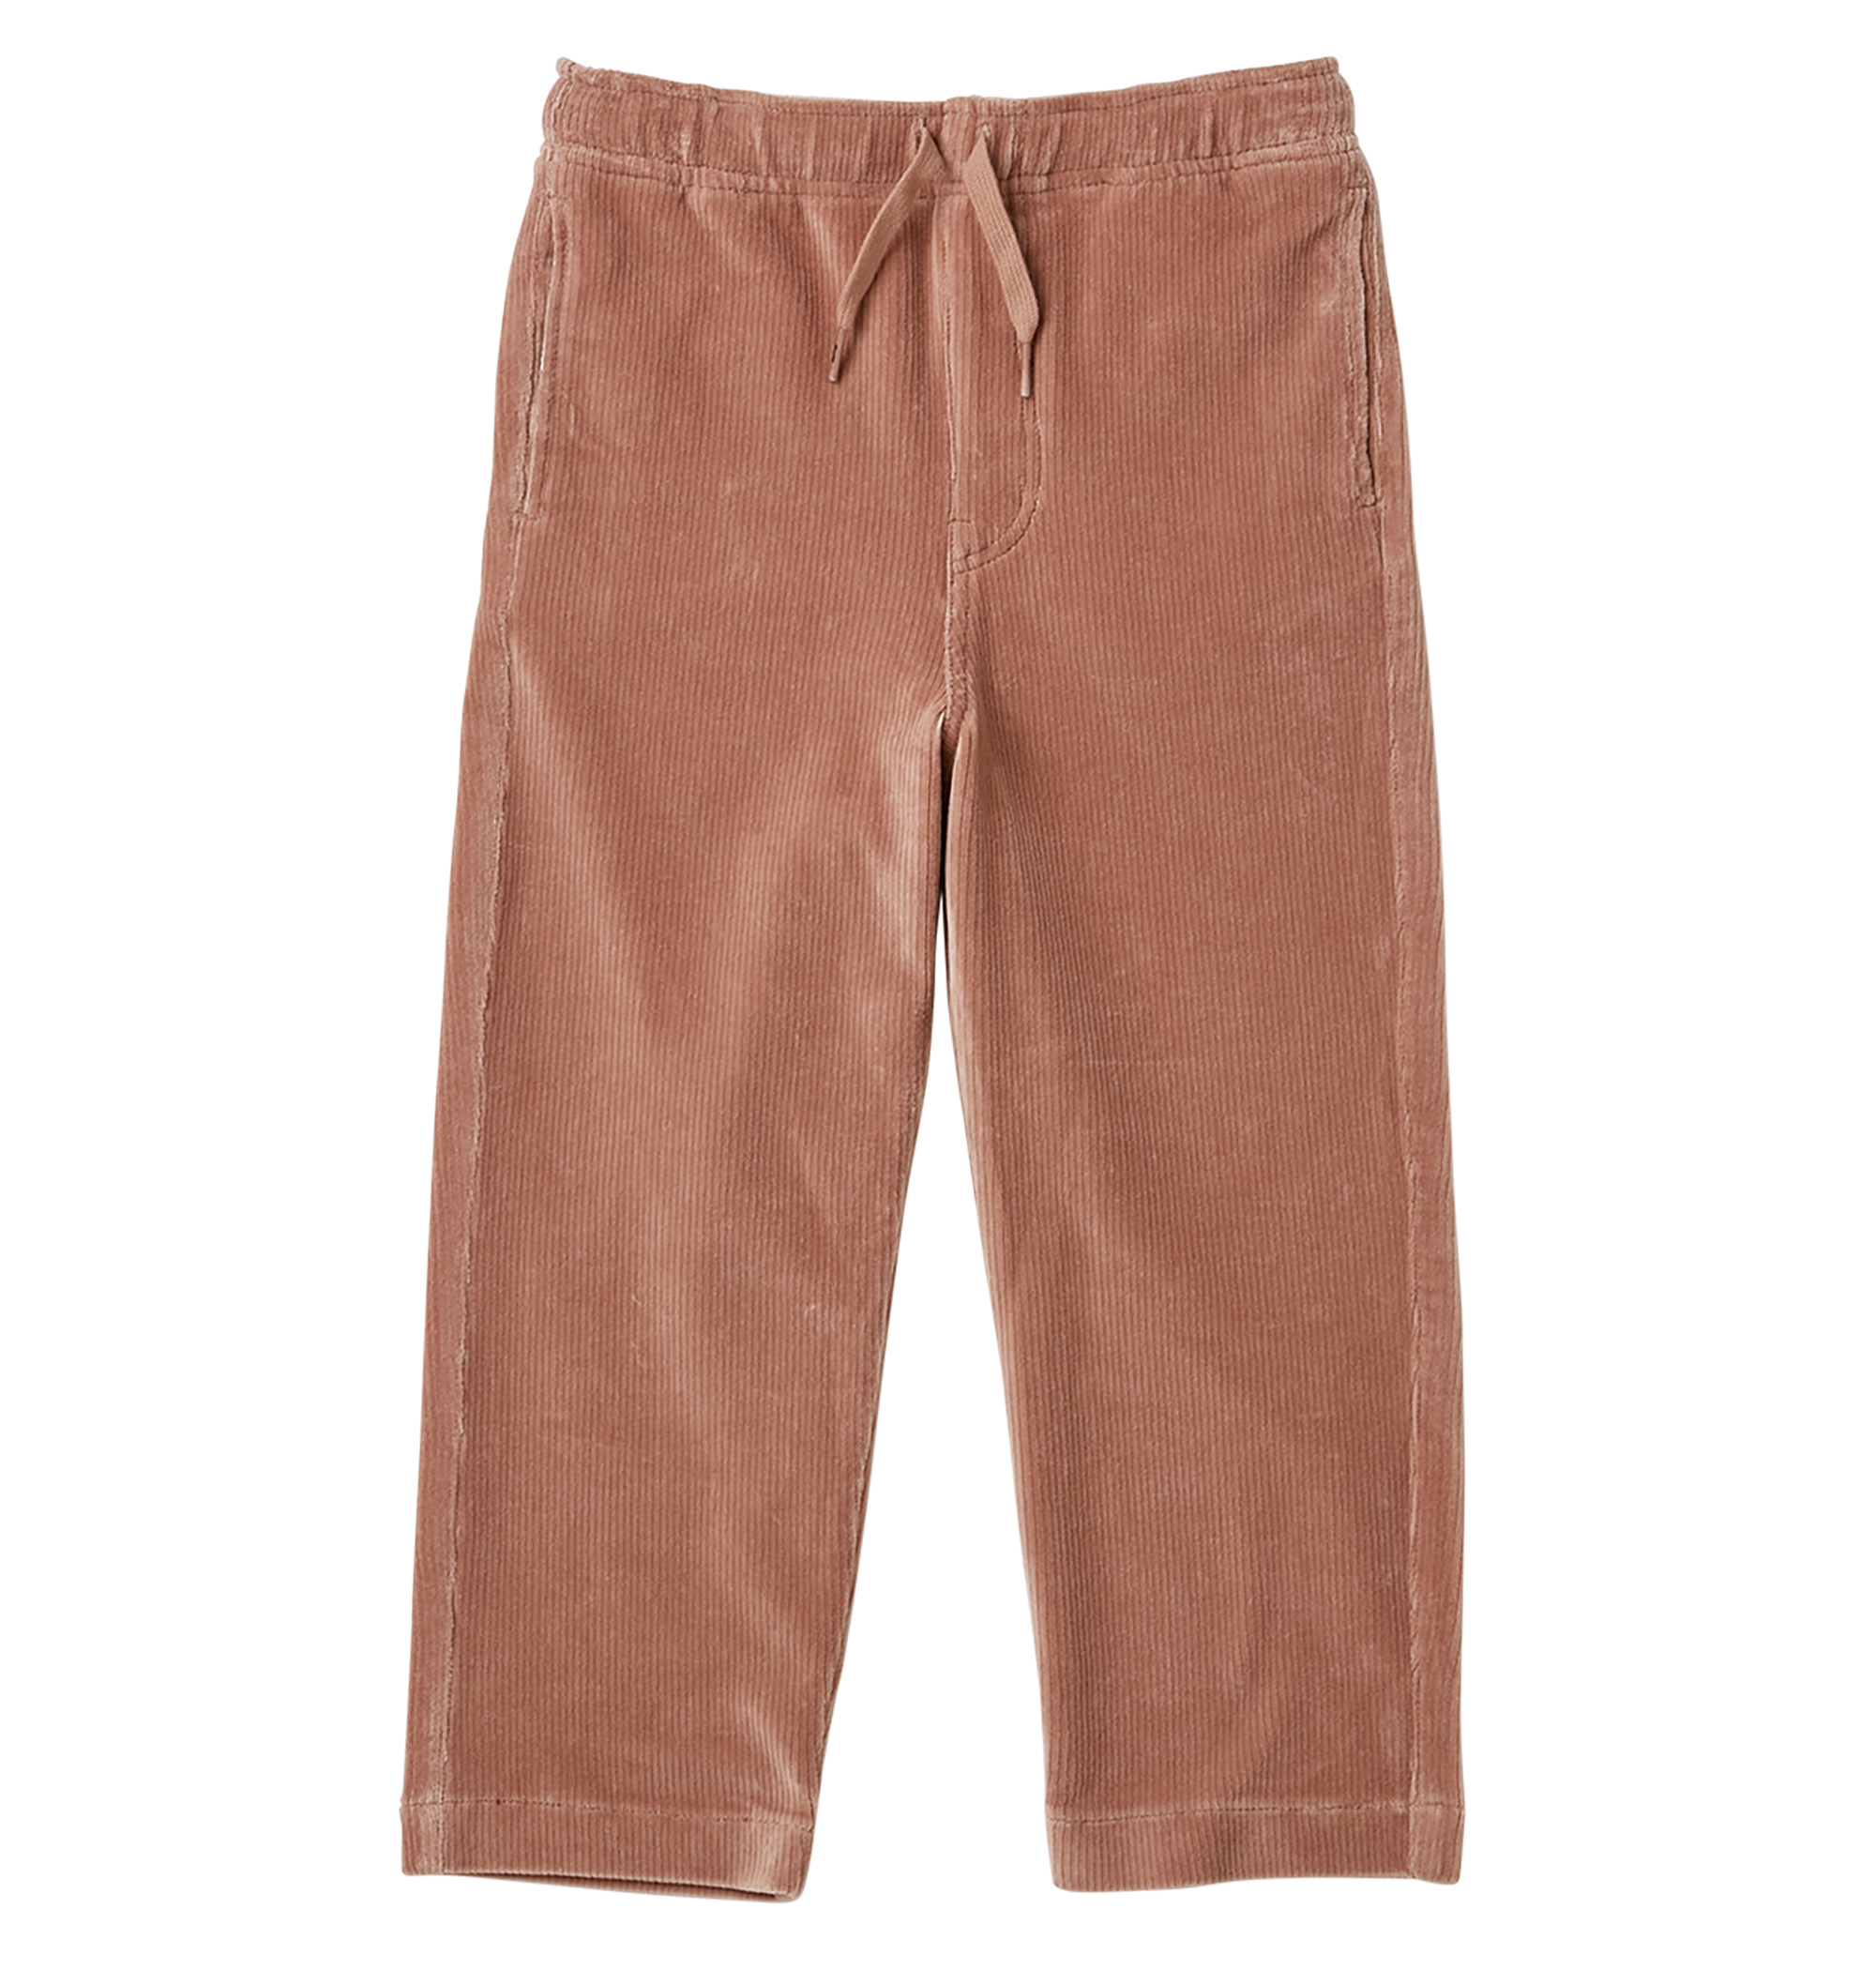 ＜DC Shoe＞ 21 KD WIDE TAPERED JERSEY PANT デイリーユースに活躍するテーパードパンツ